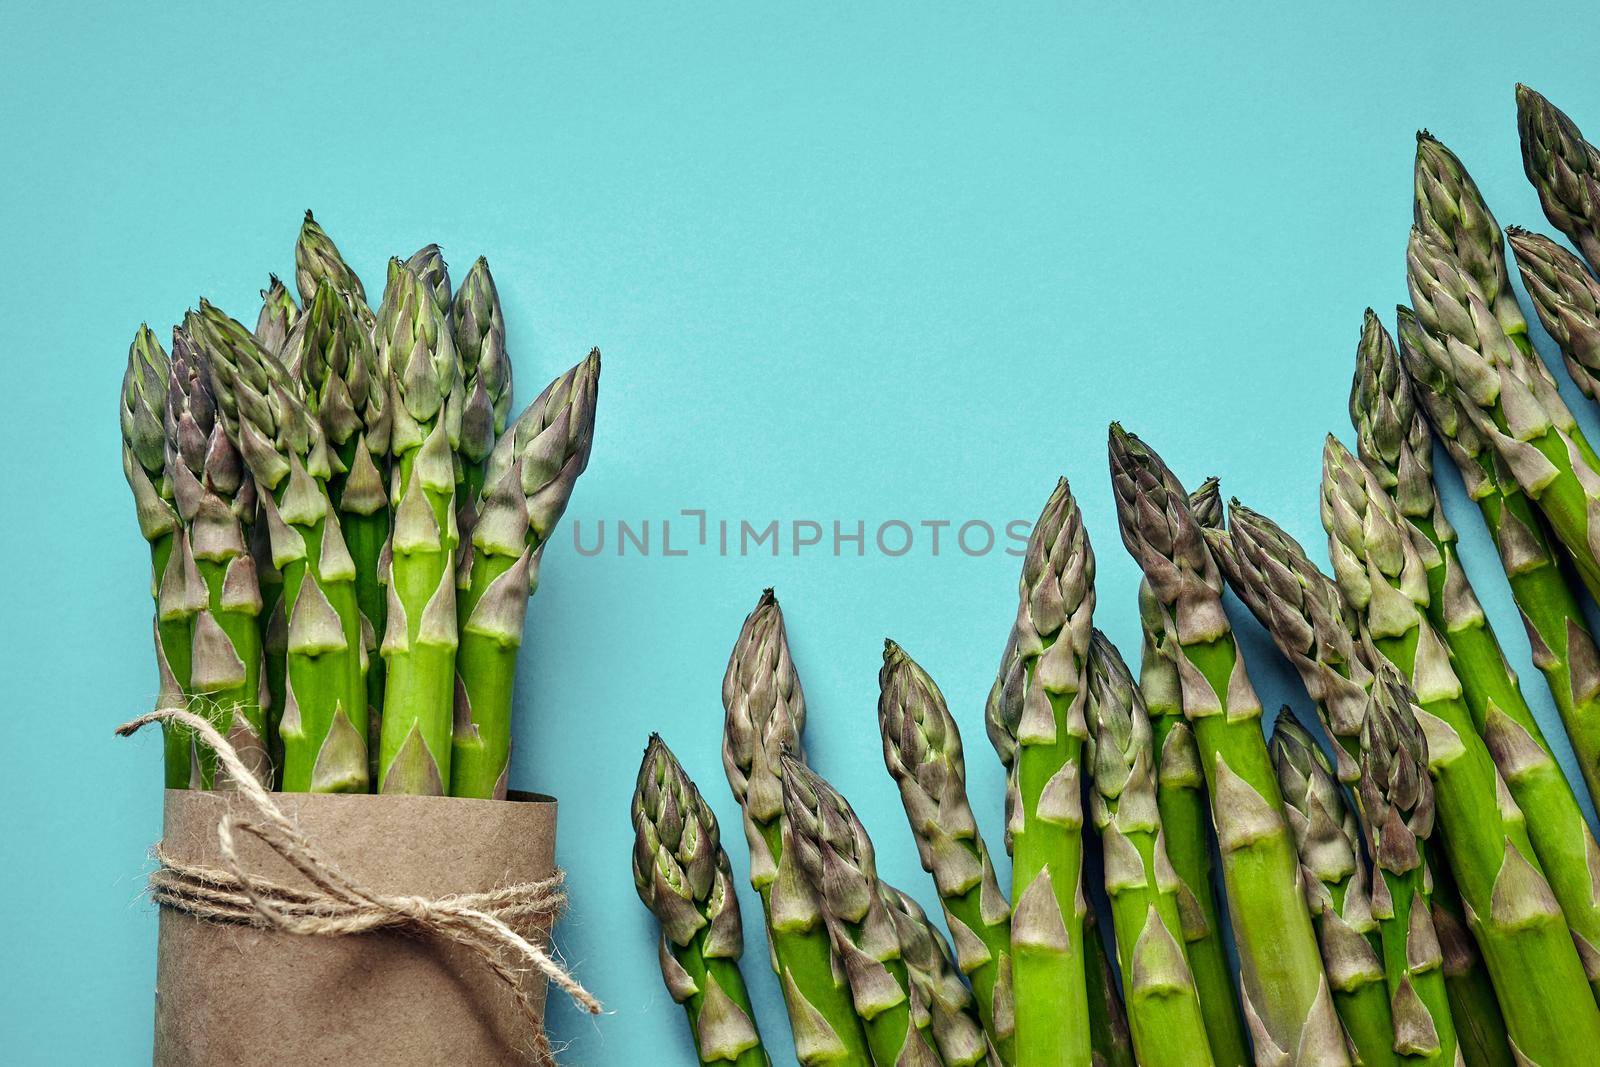 Bunch of an edible, fresh stalks of asparagus isolated on blue background. Green vegetables, top view. Healthy meal. Spring harvest, agricultural farming concept.